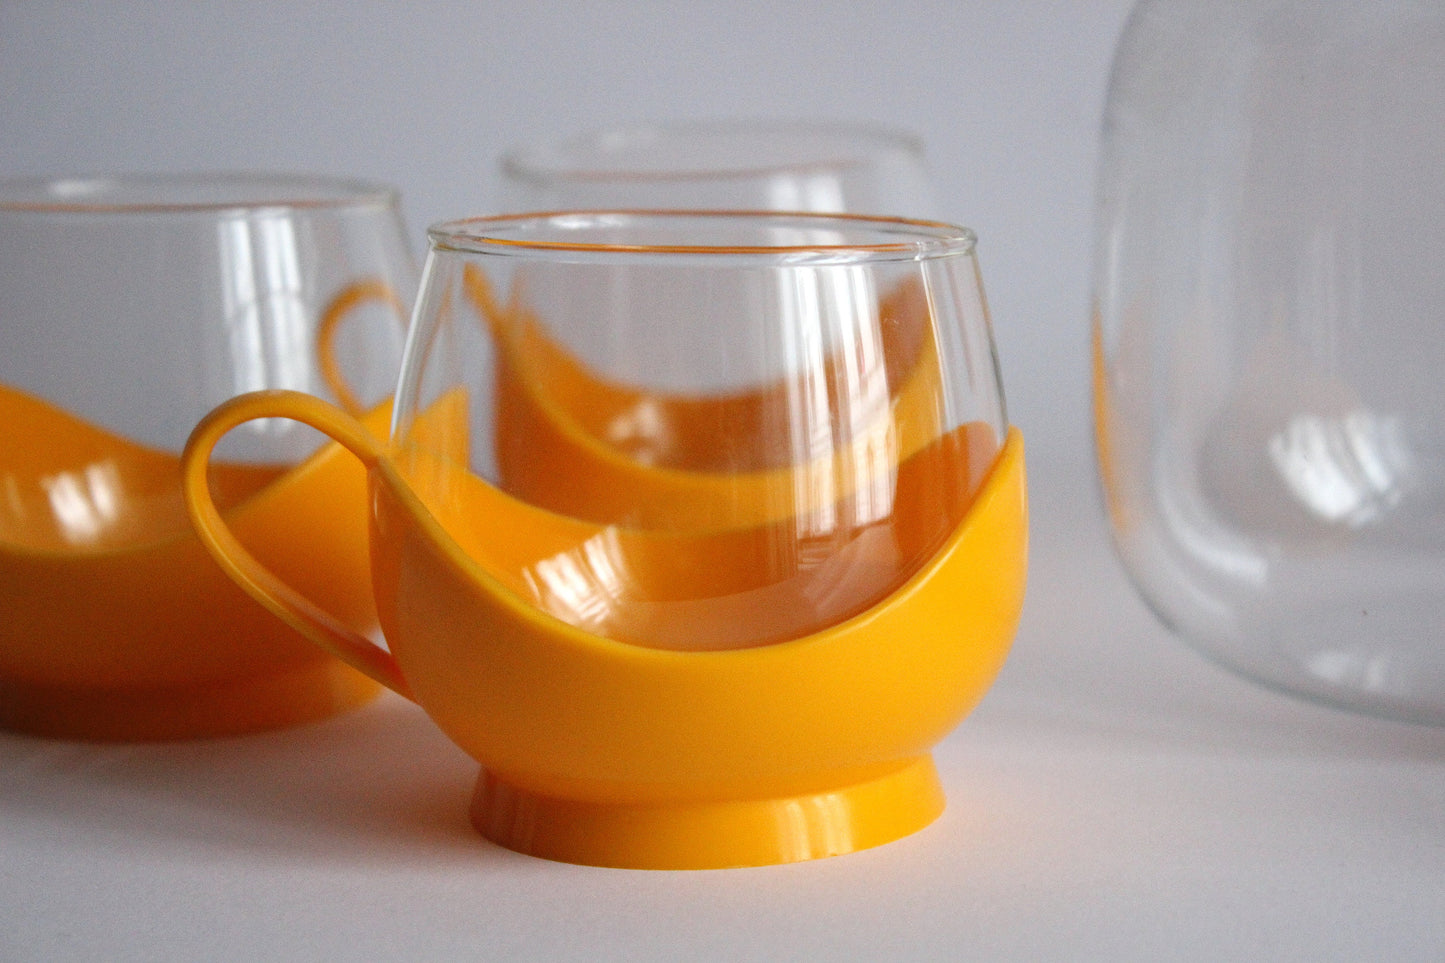 Melitta Germany Set of yellow glass tumblers and pitcher with plastic handles - 60s / 70s